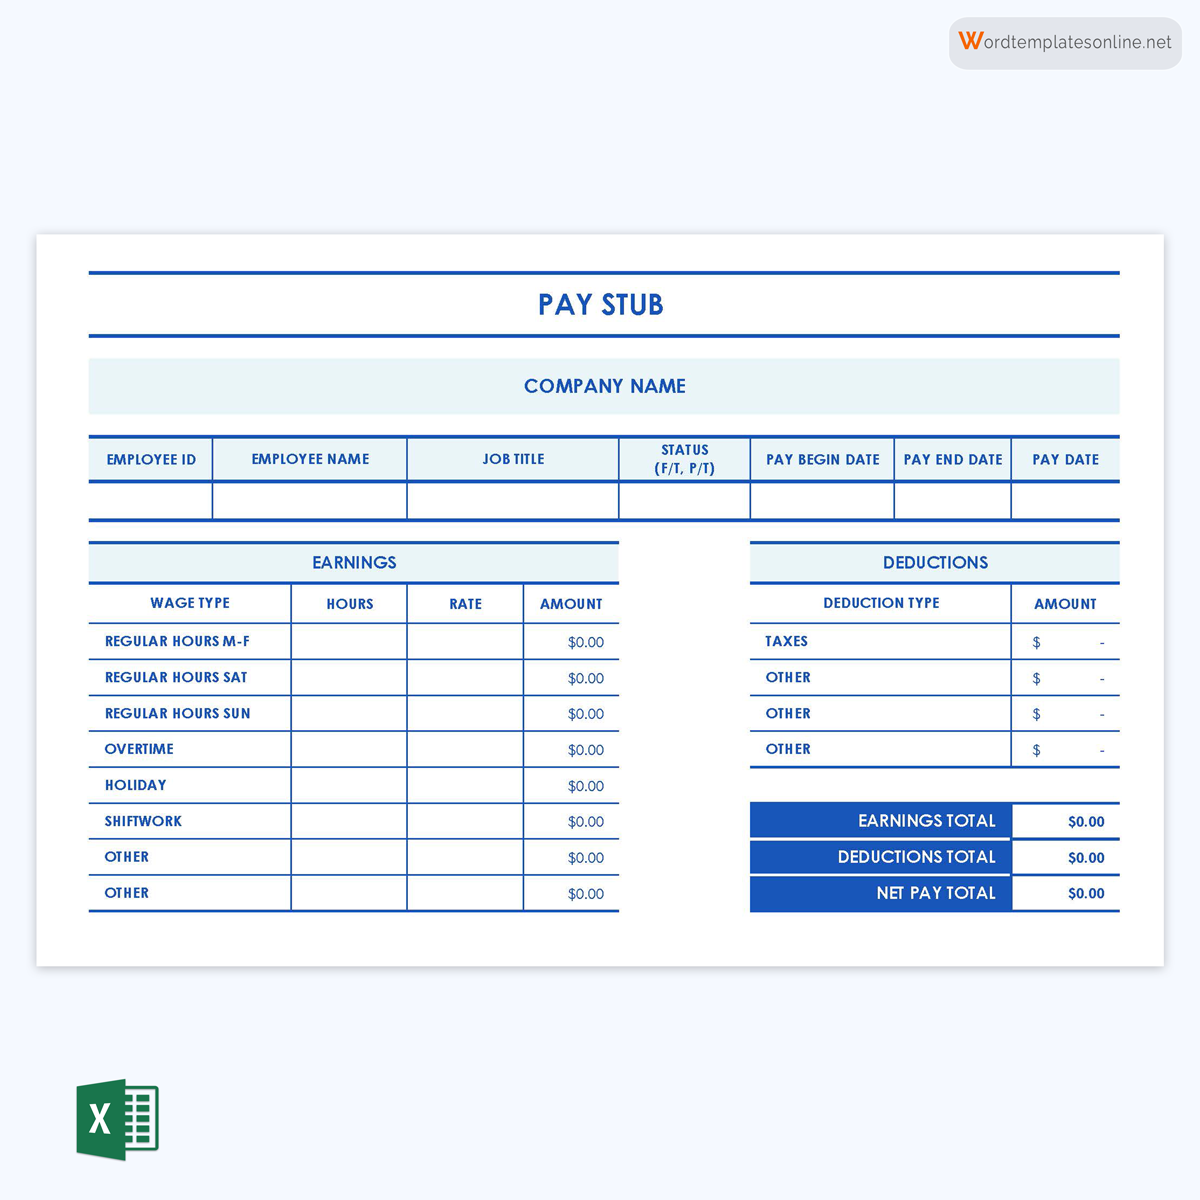 Free Customizable Pay Stub Template 05 as Excel Sheet